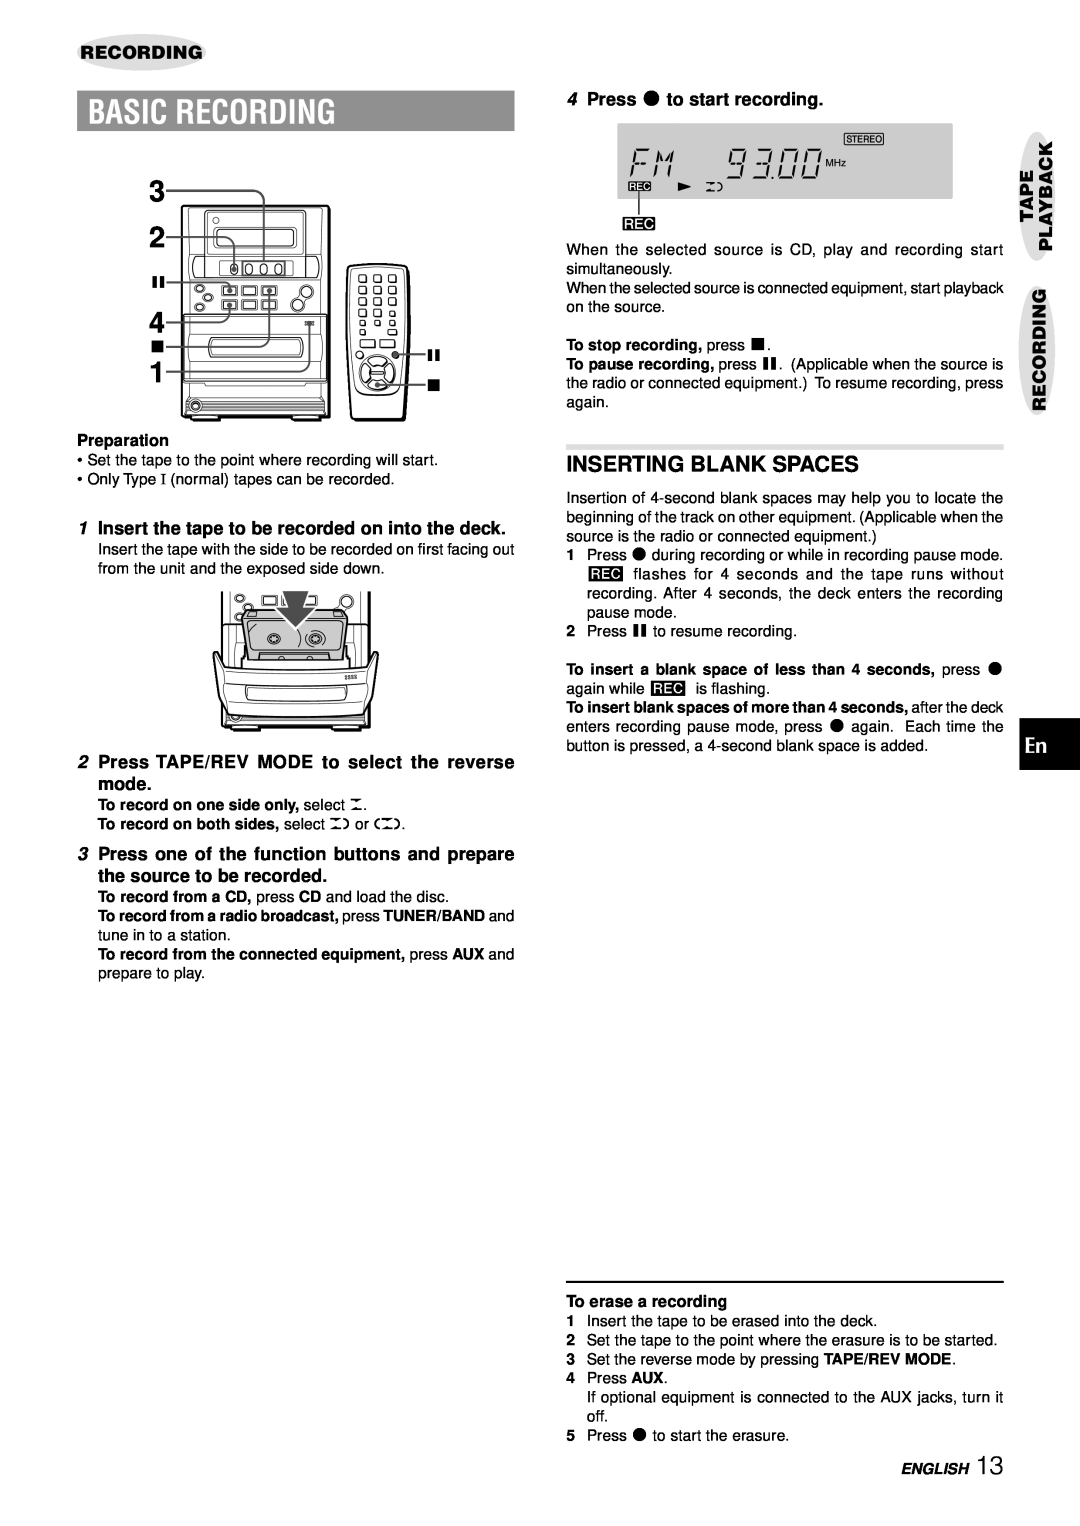 Aiwa LCX-357 manual Basic Recording, Inserting Blank Spaces, 1Insert the tape to be recorded on into the deck, Preparation 